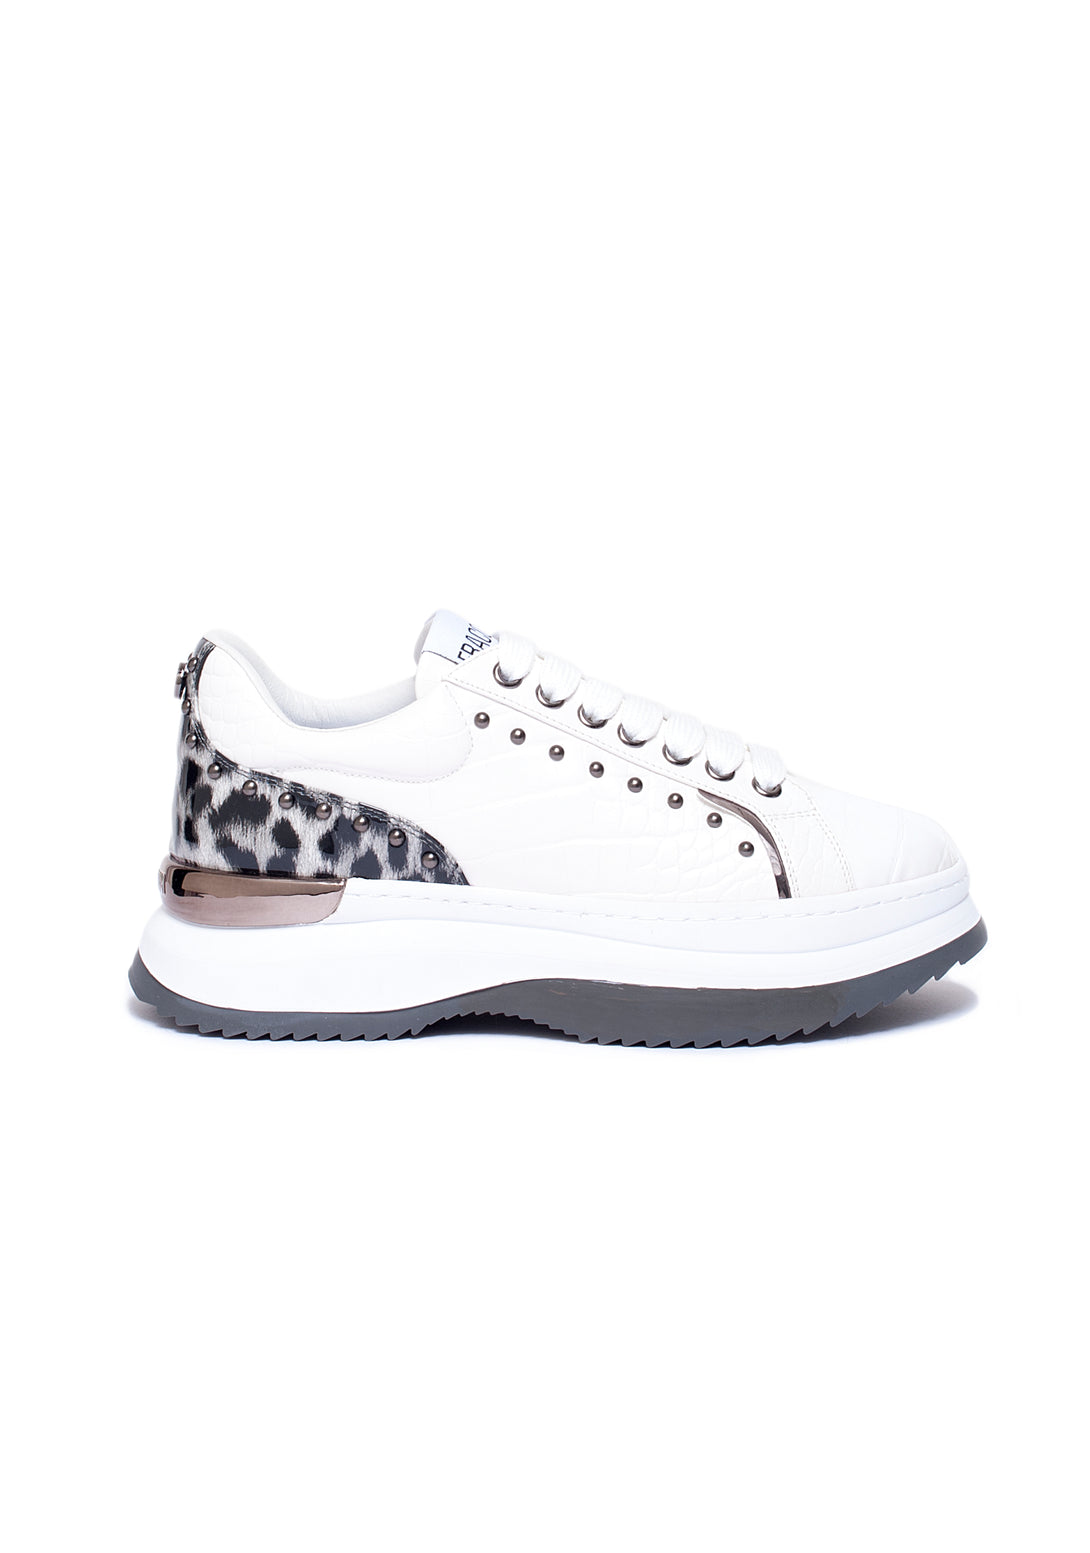 Sneakers made in eco leather with crocodile print Fracomina F721WS6003P41101-278